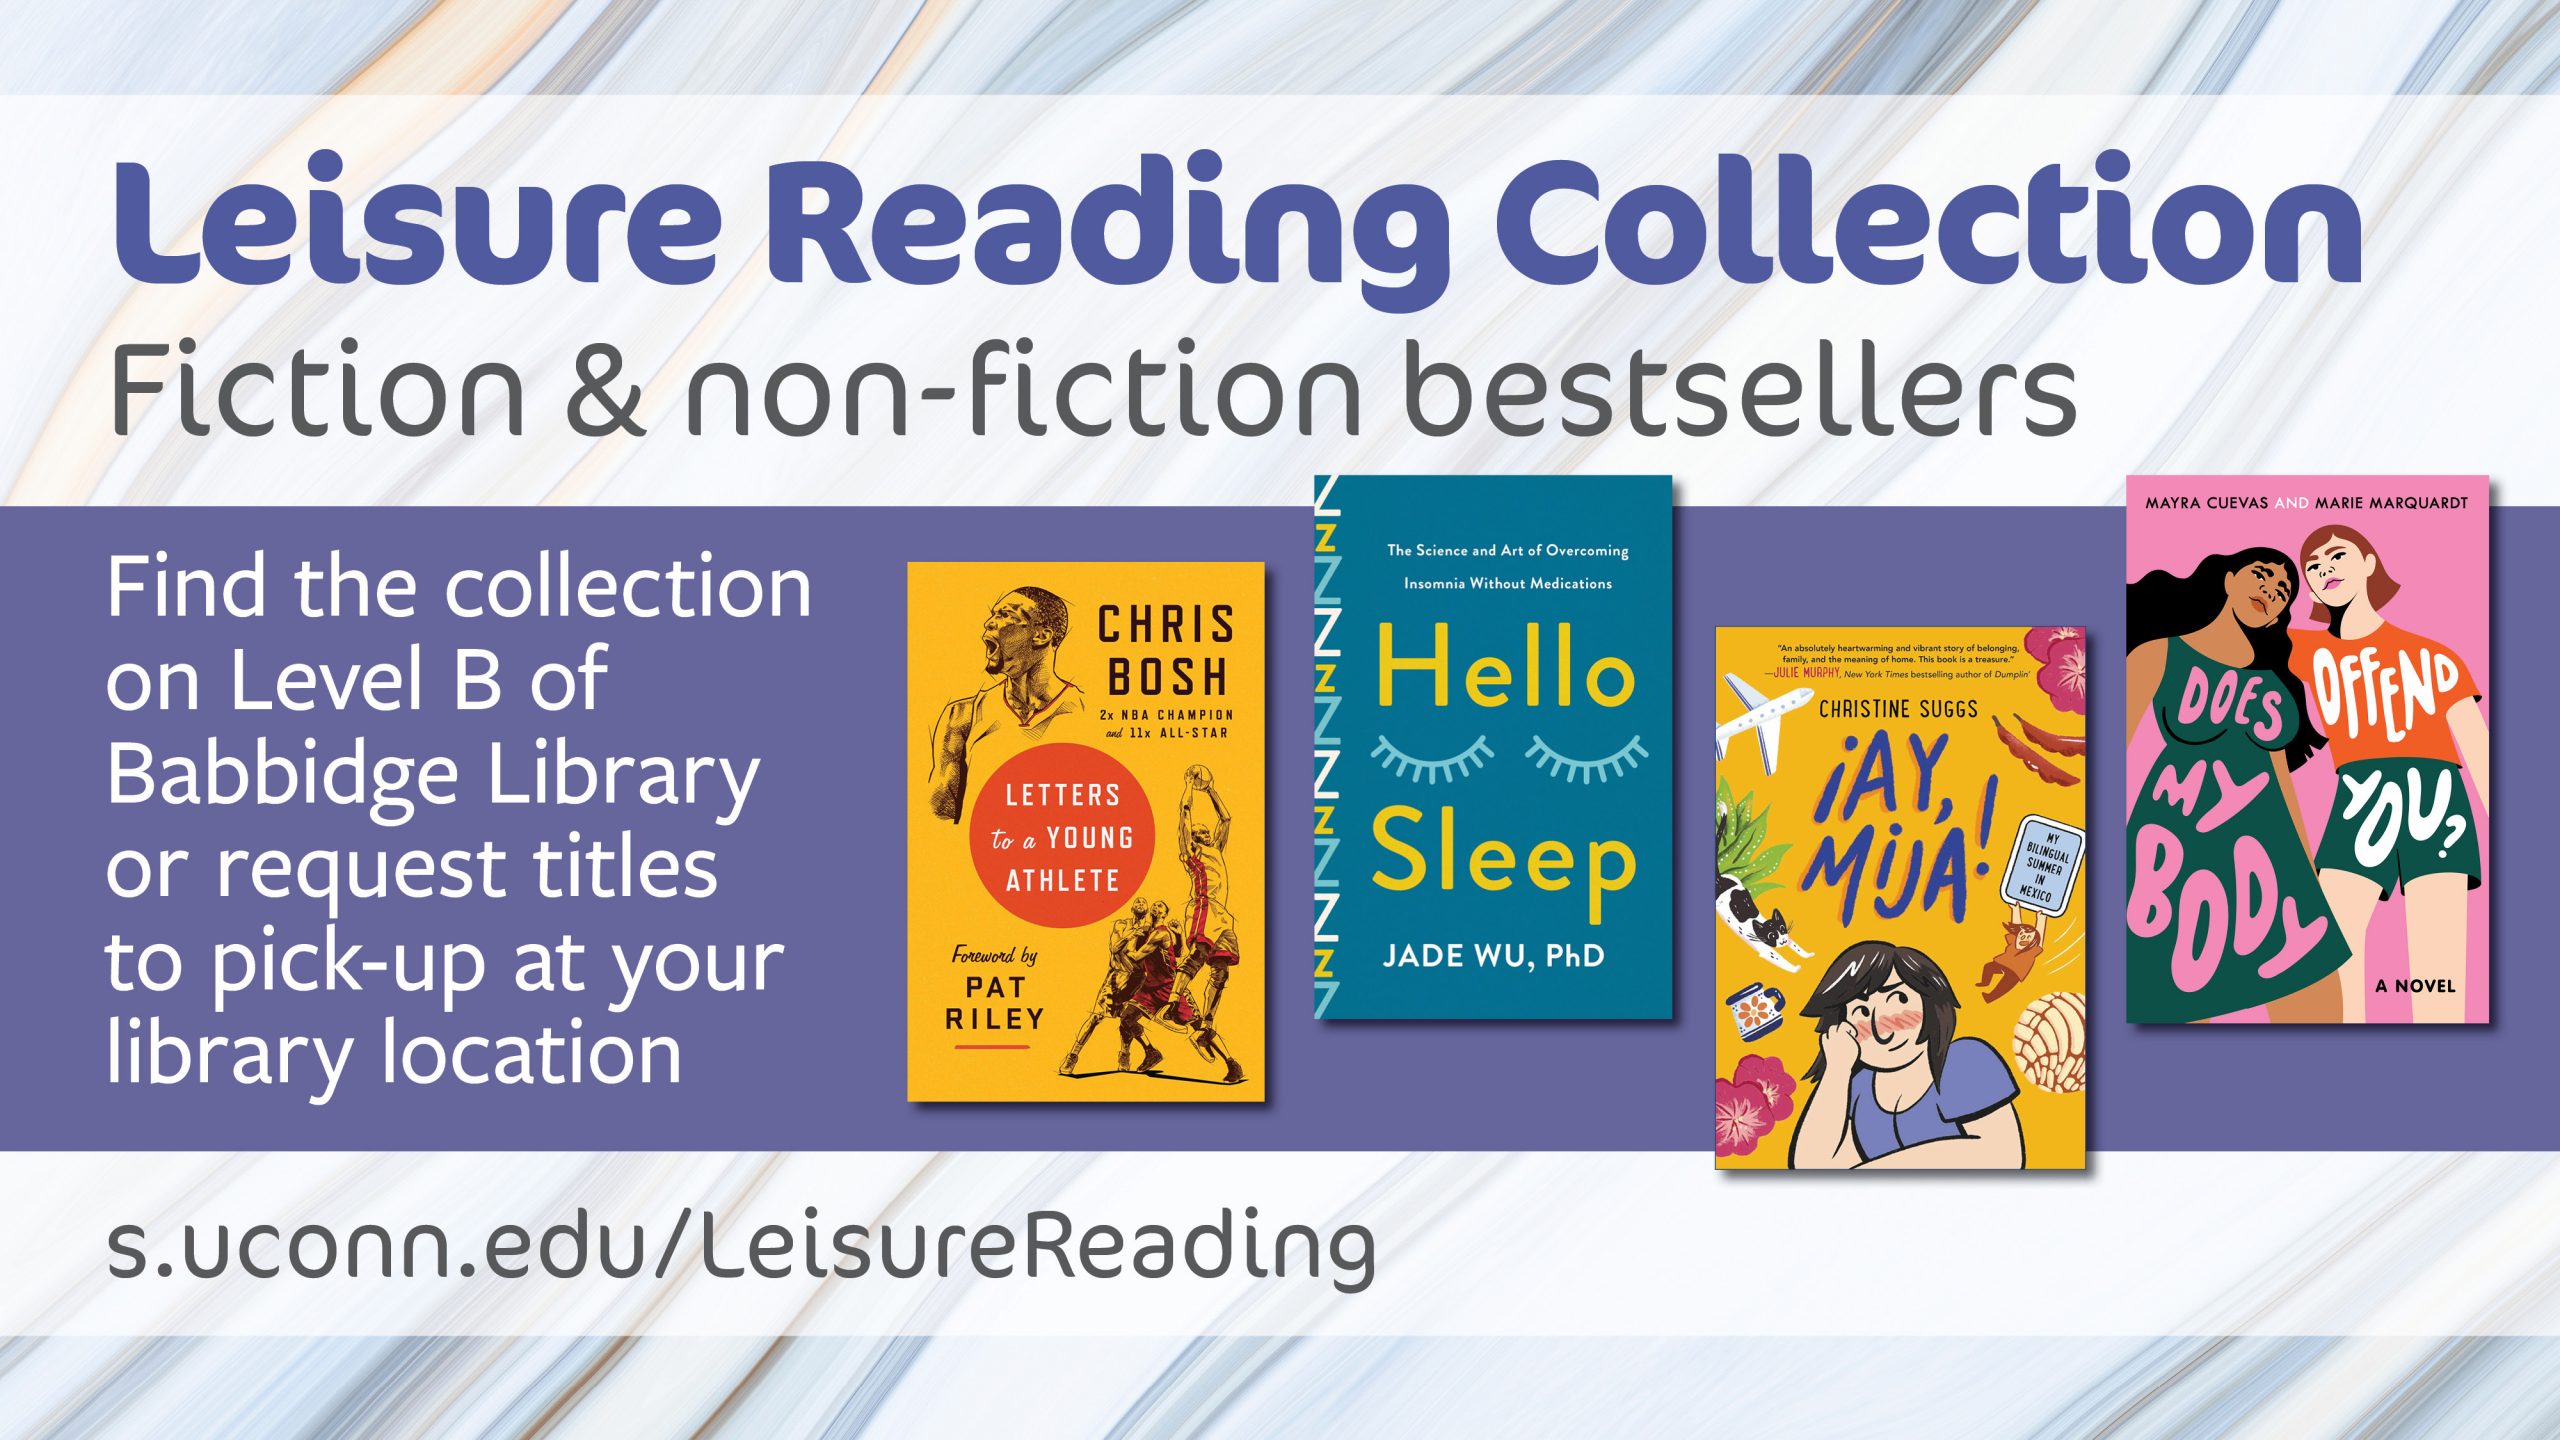 Leisure Reading Collection: Fiction & non-fiction bestsellers. Find the collection on Level B of Babbidge Library or request titles to pick up at your library location. Visit s.uconn.edu/LeisureReading